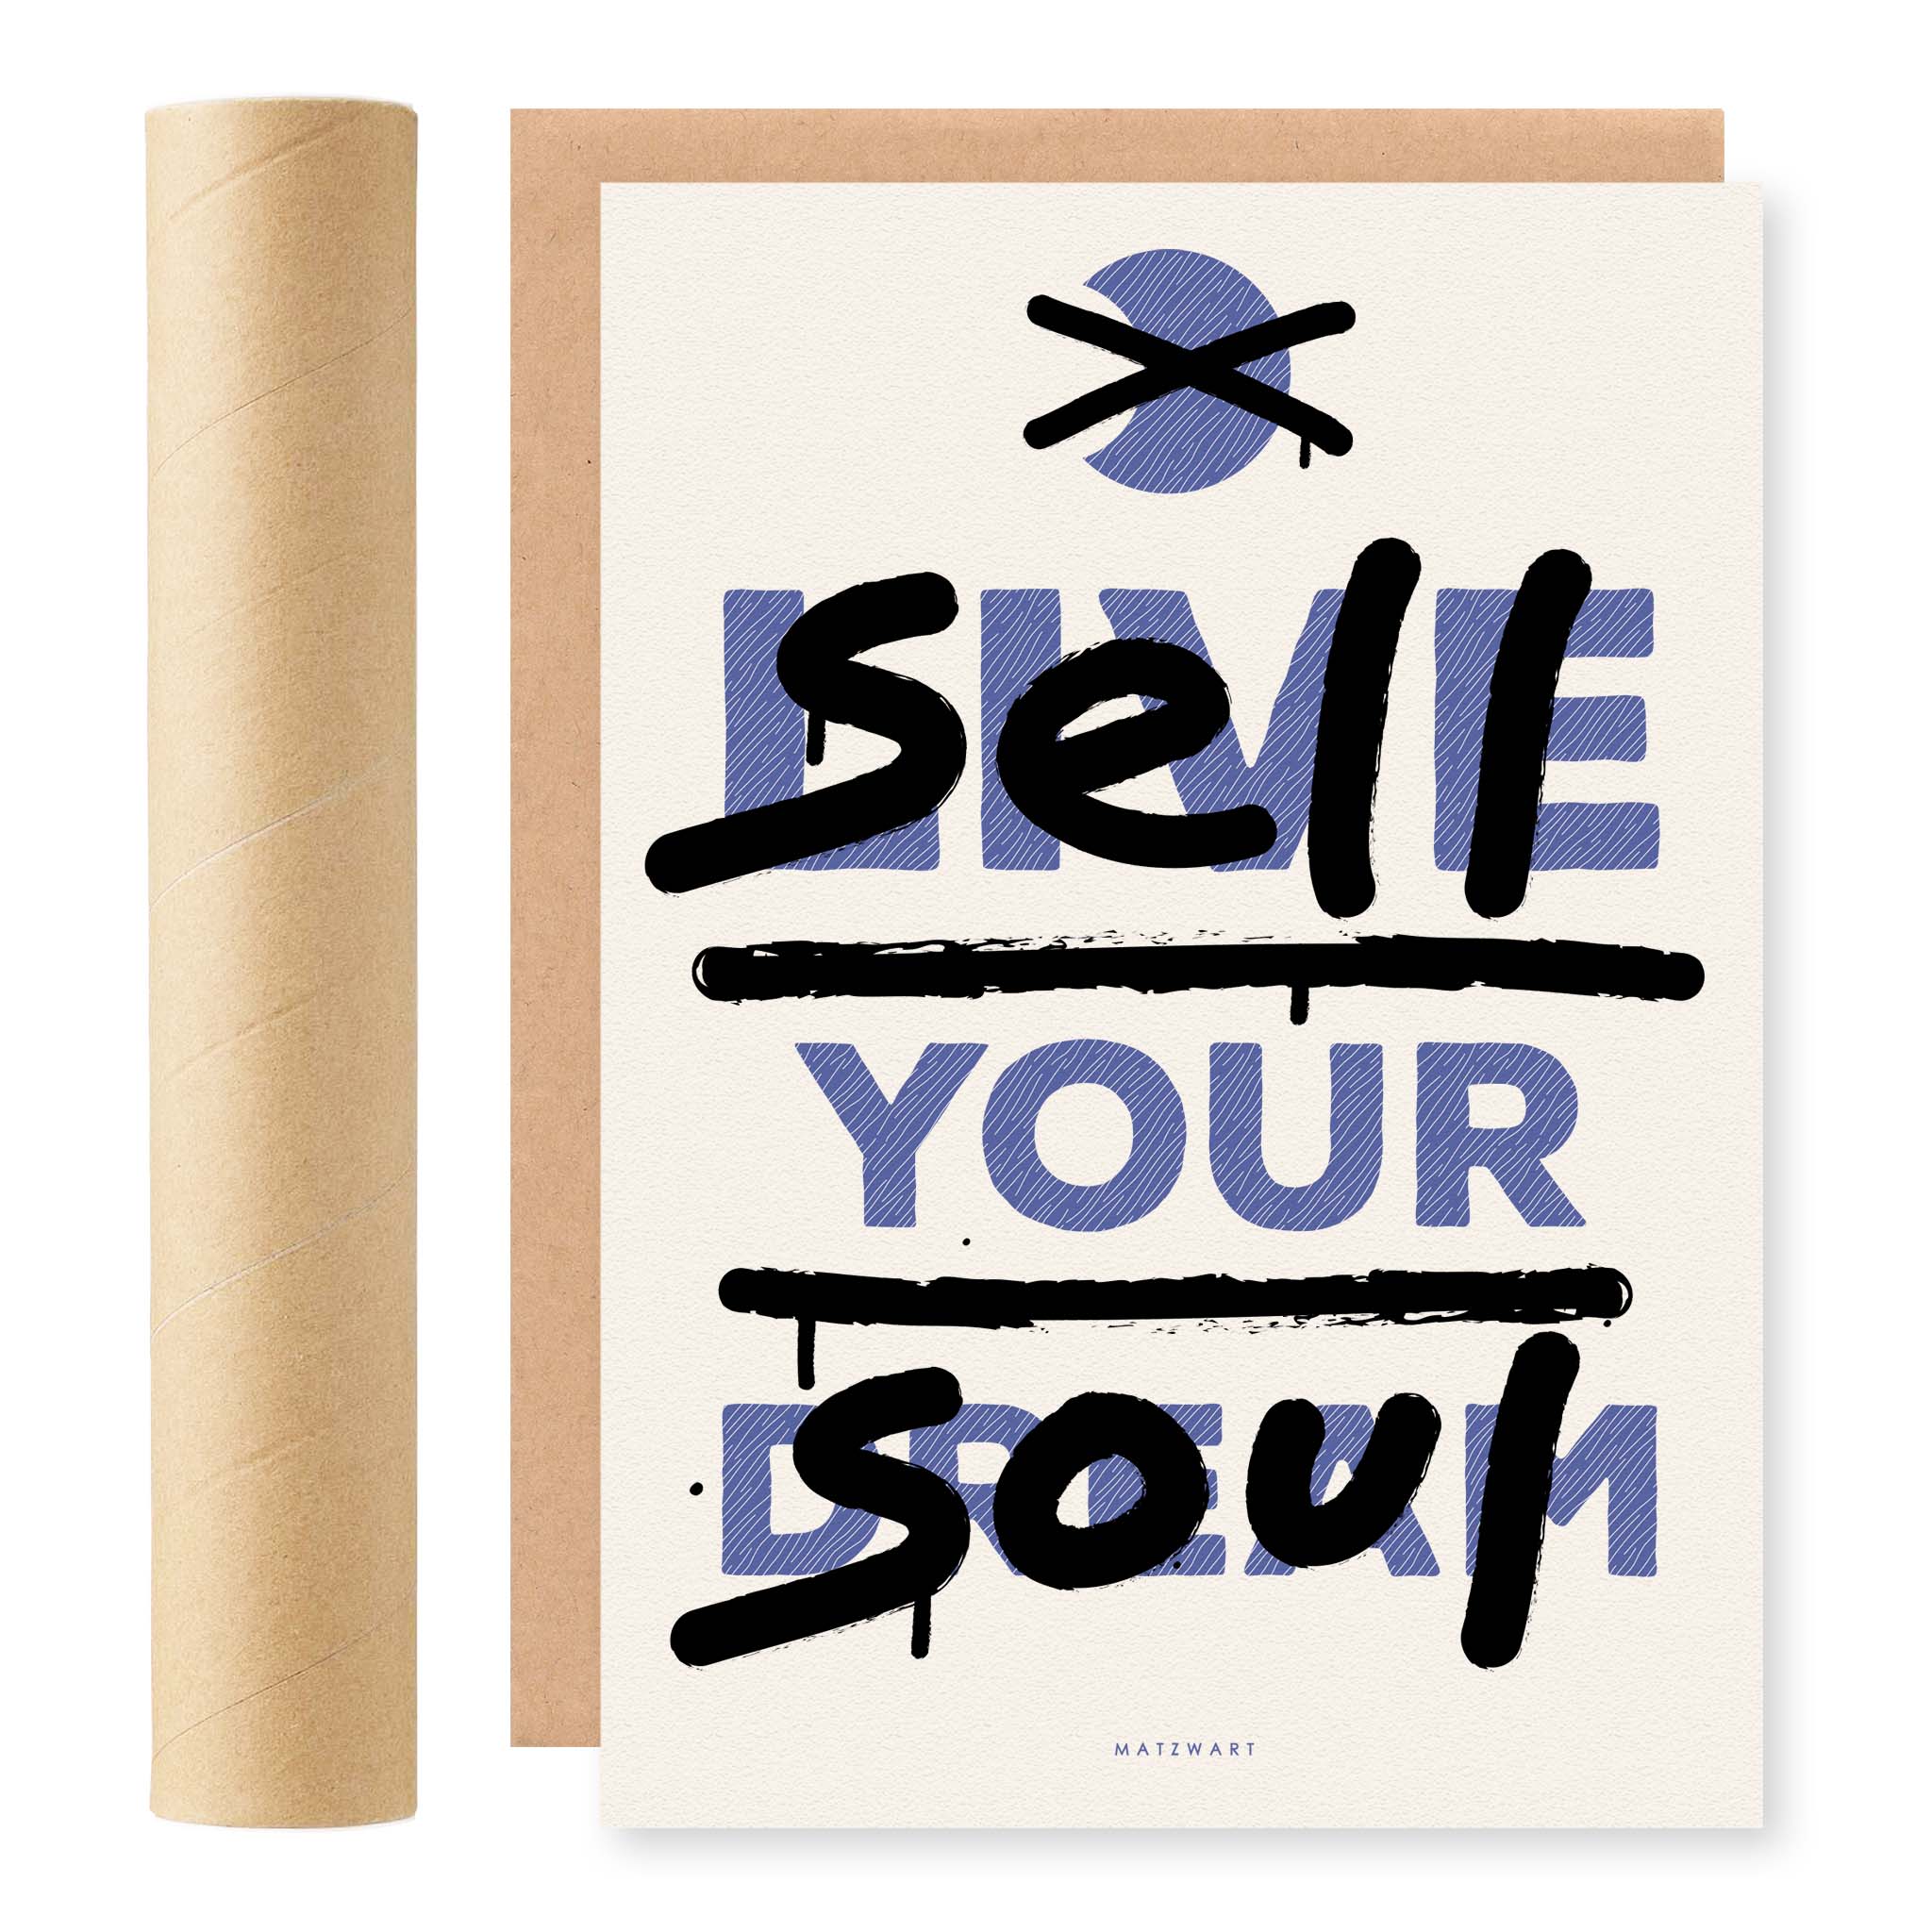 Sell Your Soul Art Print